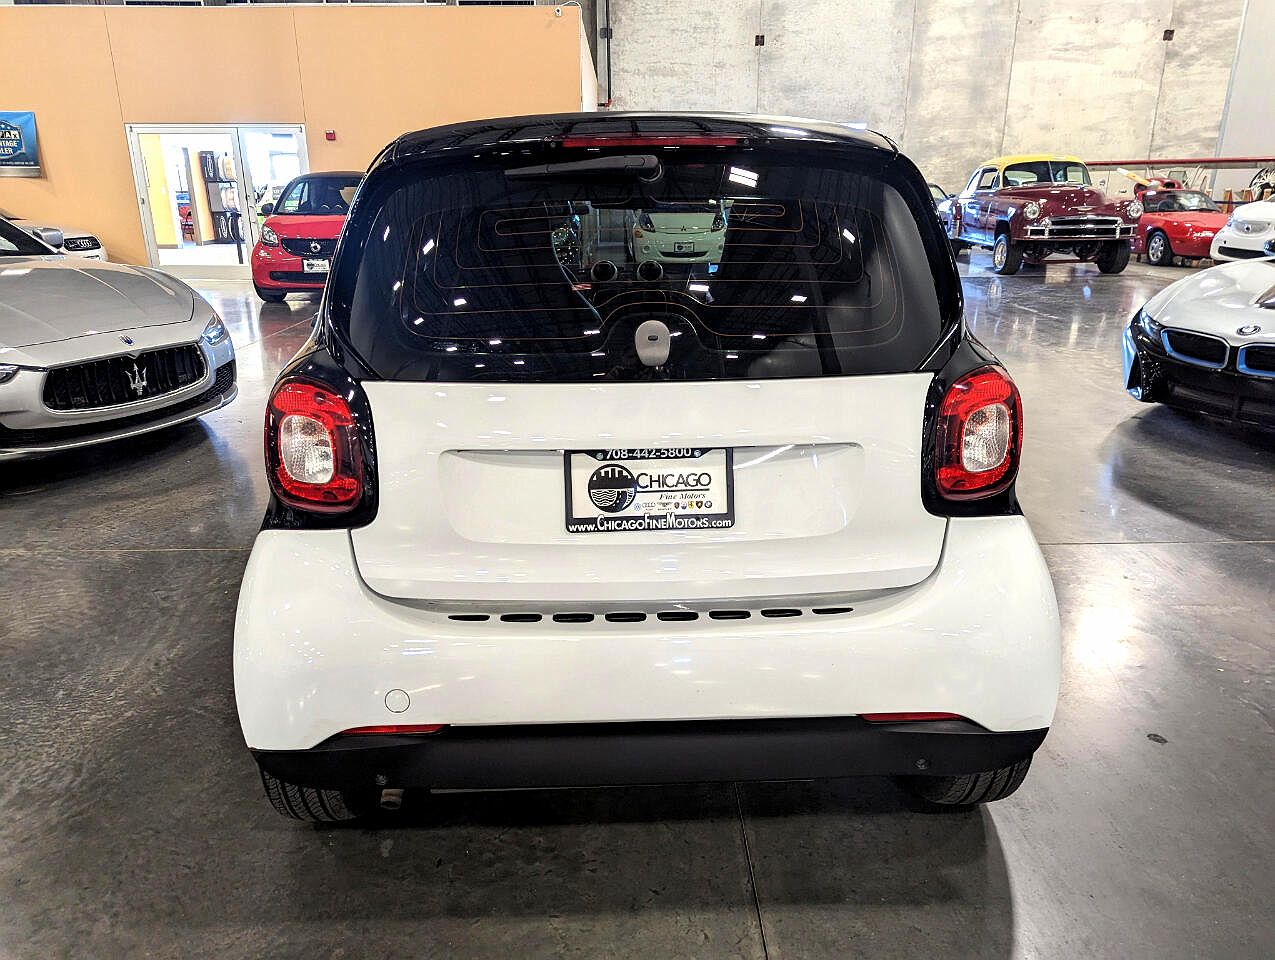 2016 Smart Fortwo Passion image 7